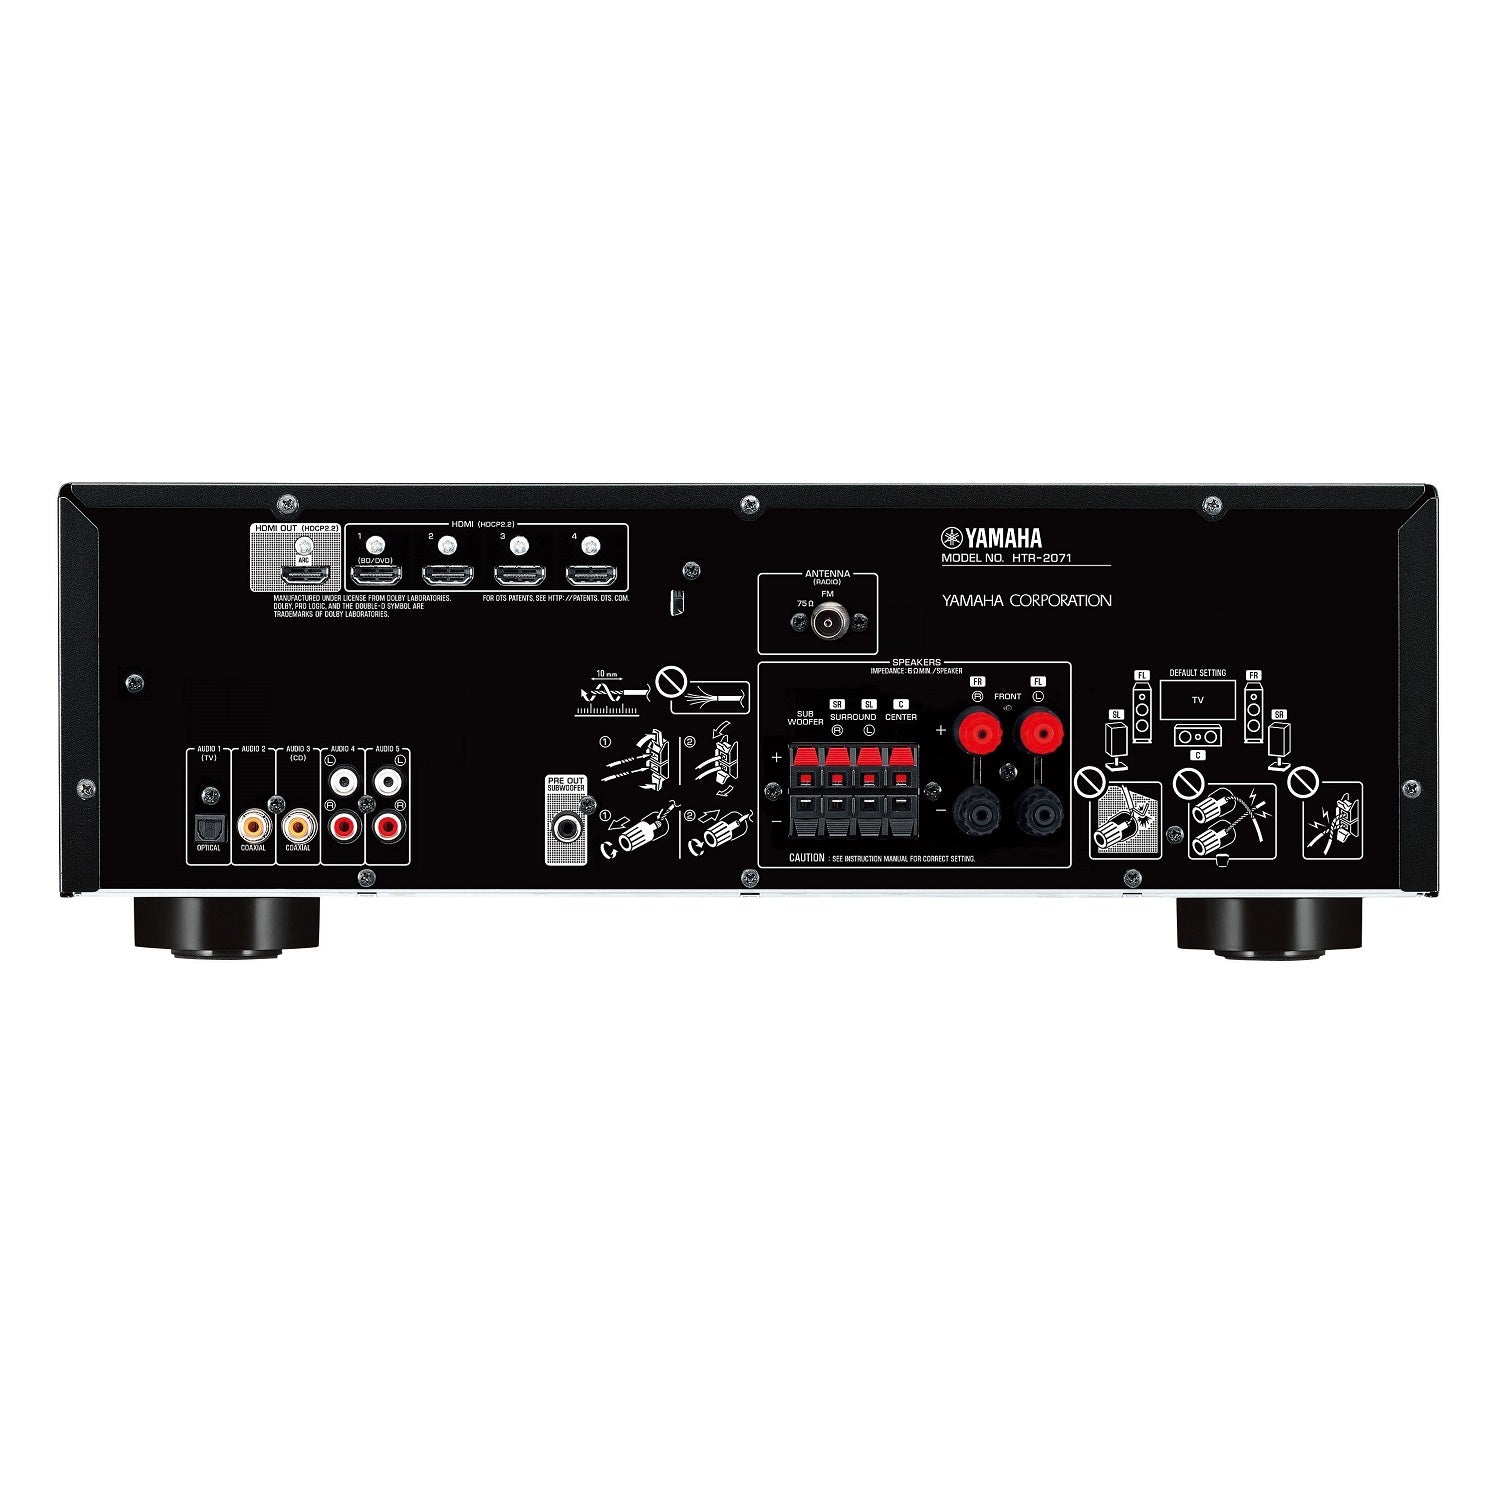 Yamaha YHT-1840 5.1-Channel Powerful and Dynamic Surround System